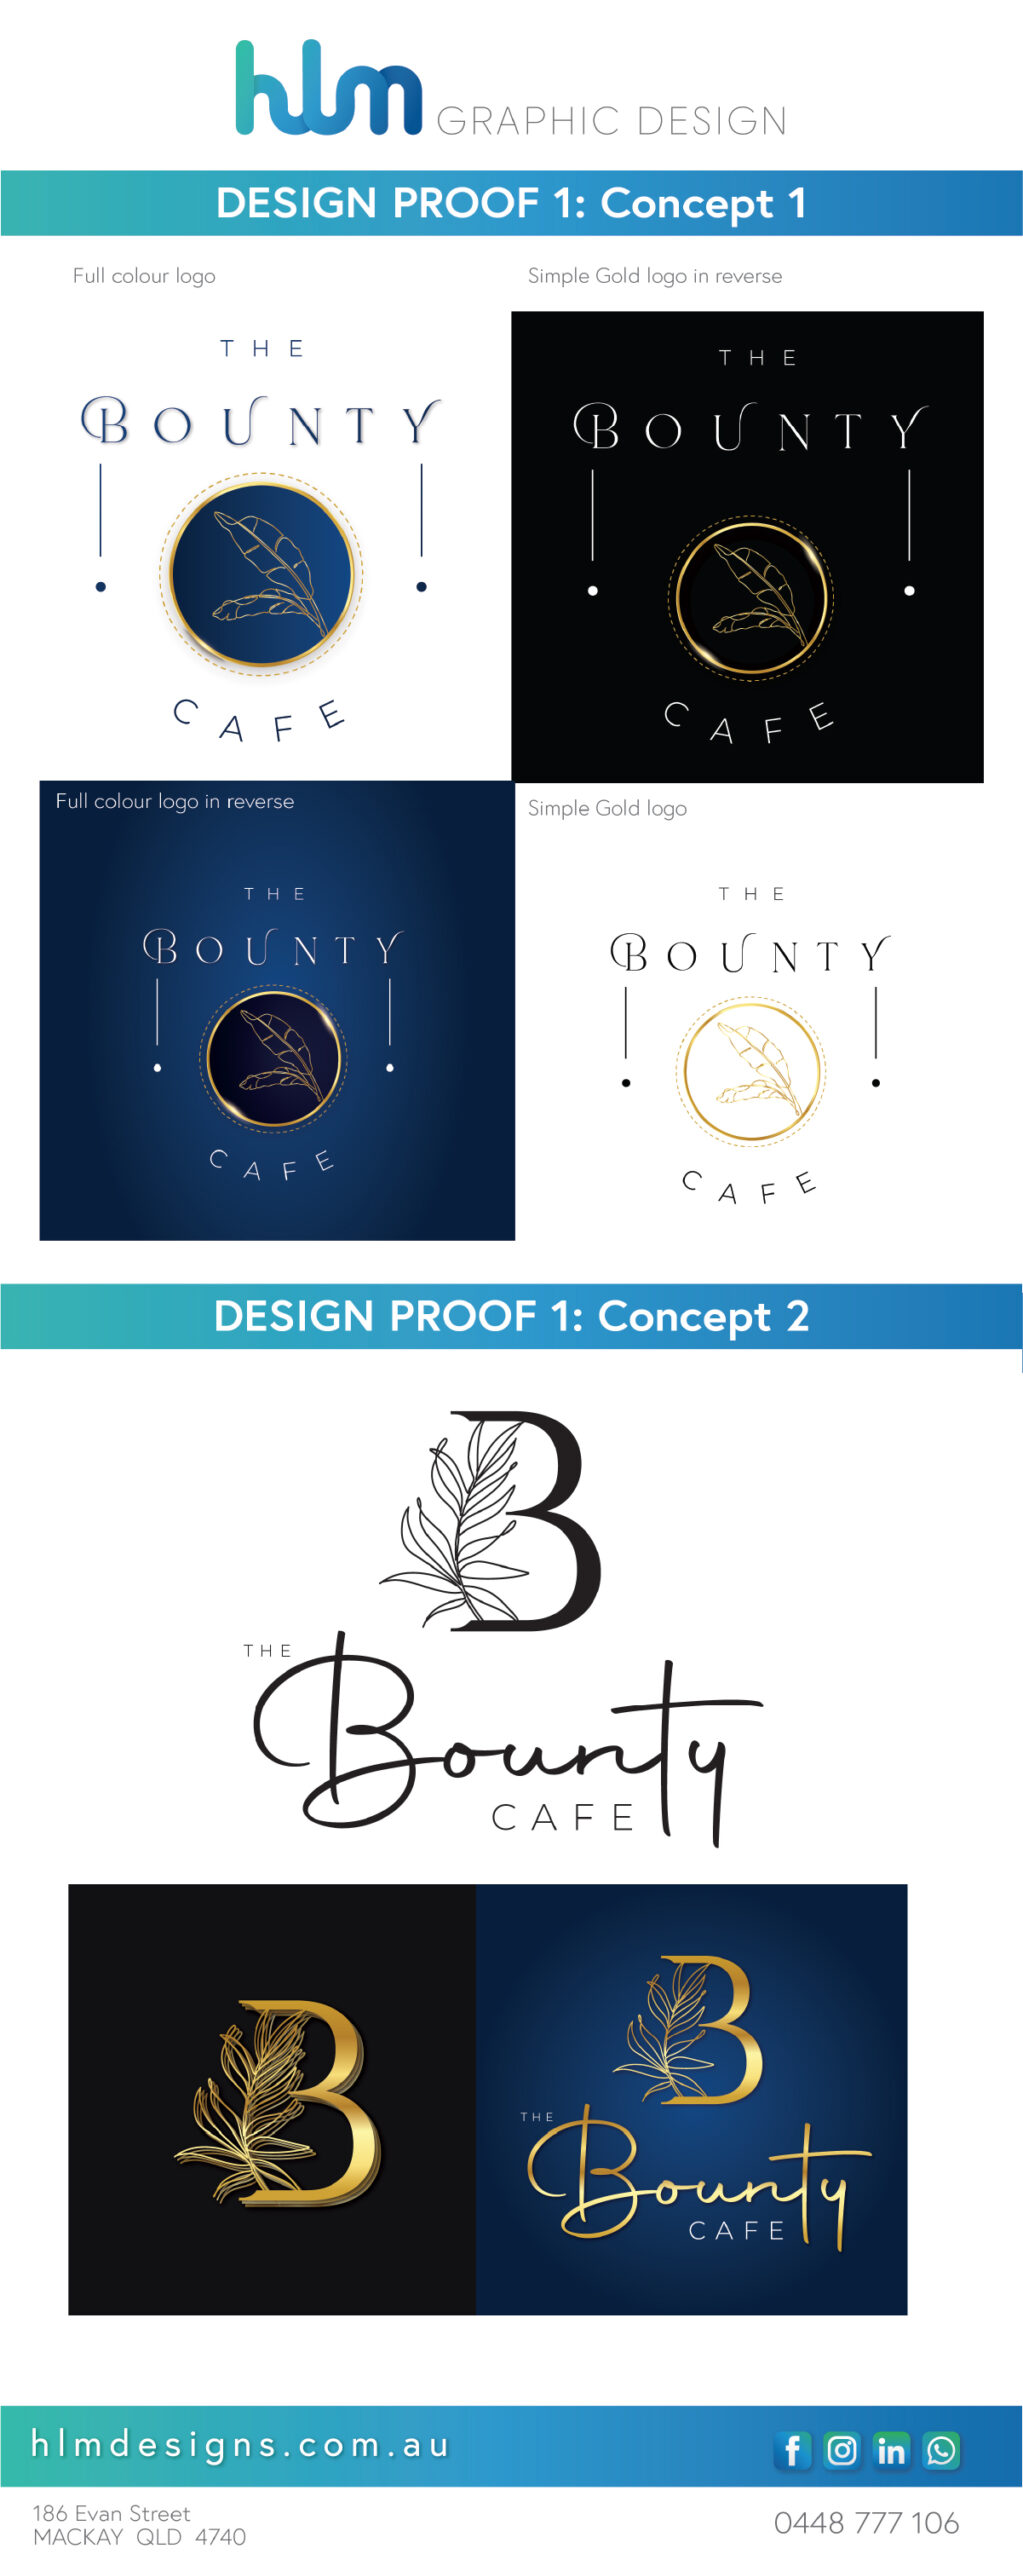 Logo Design Art Proof 1 with 2 concepts